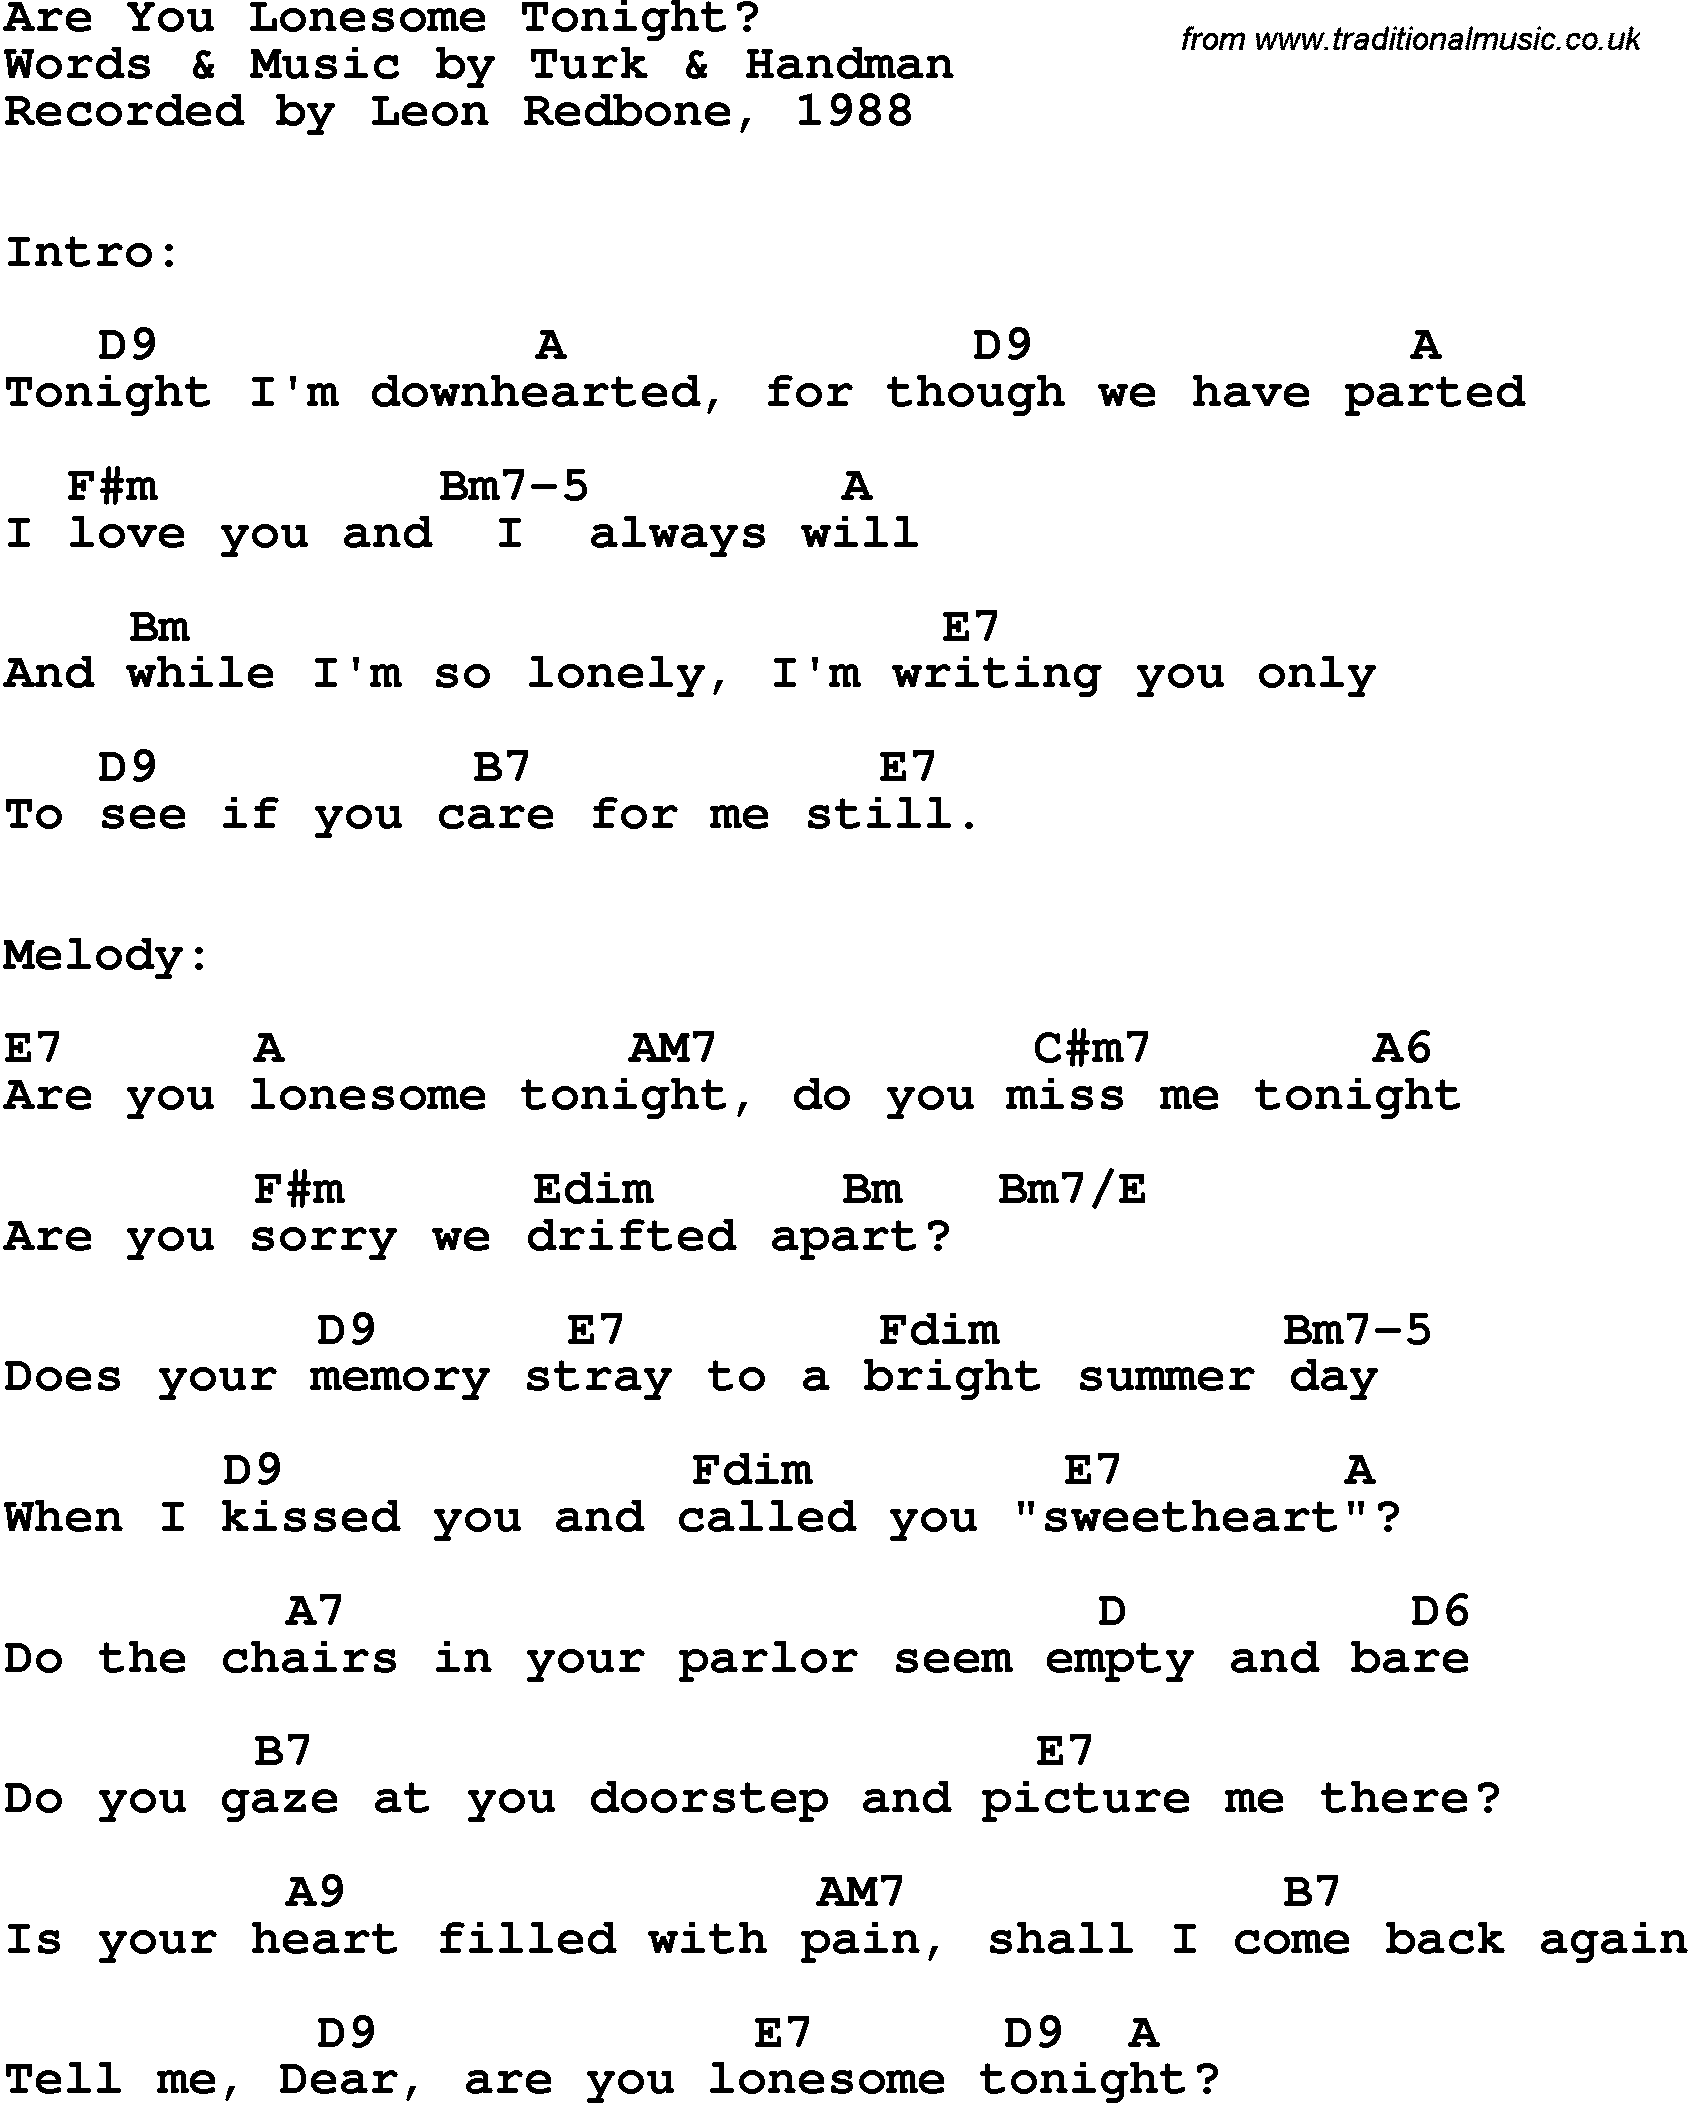 Song Lyrics with guitar chords for Are You Lonesome Tonight - Leon Redbone, 1988